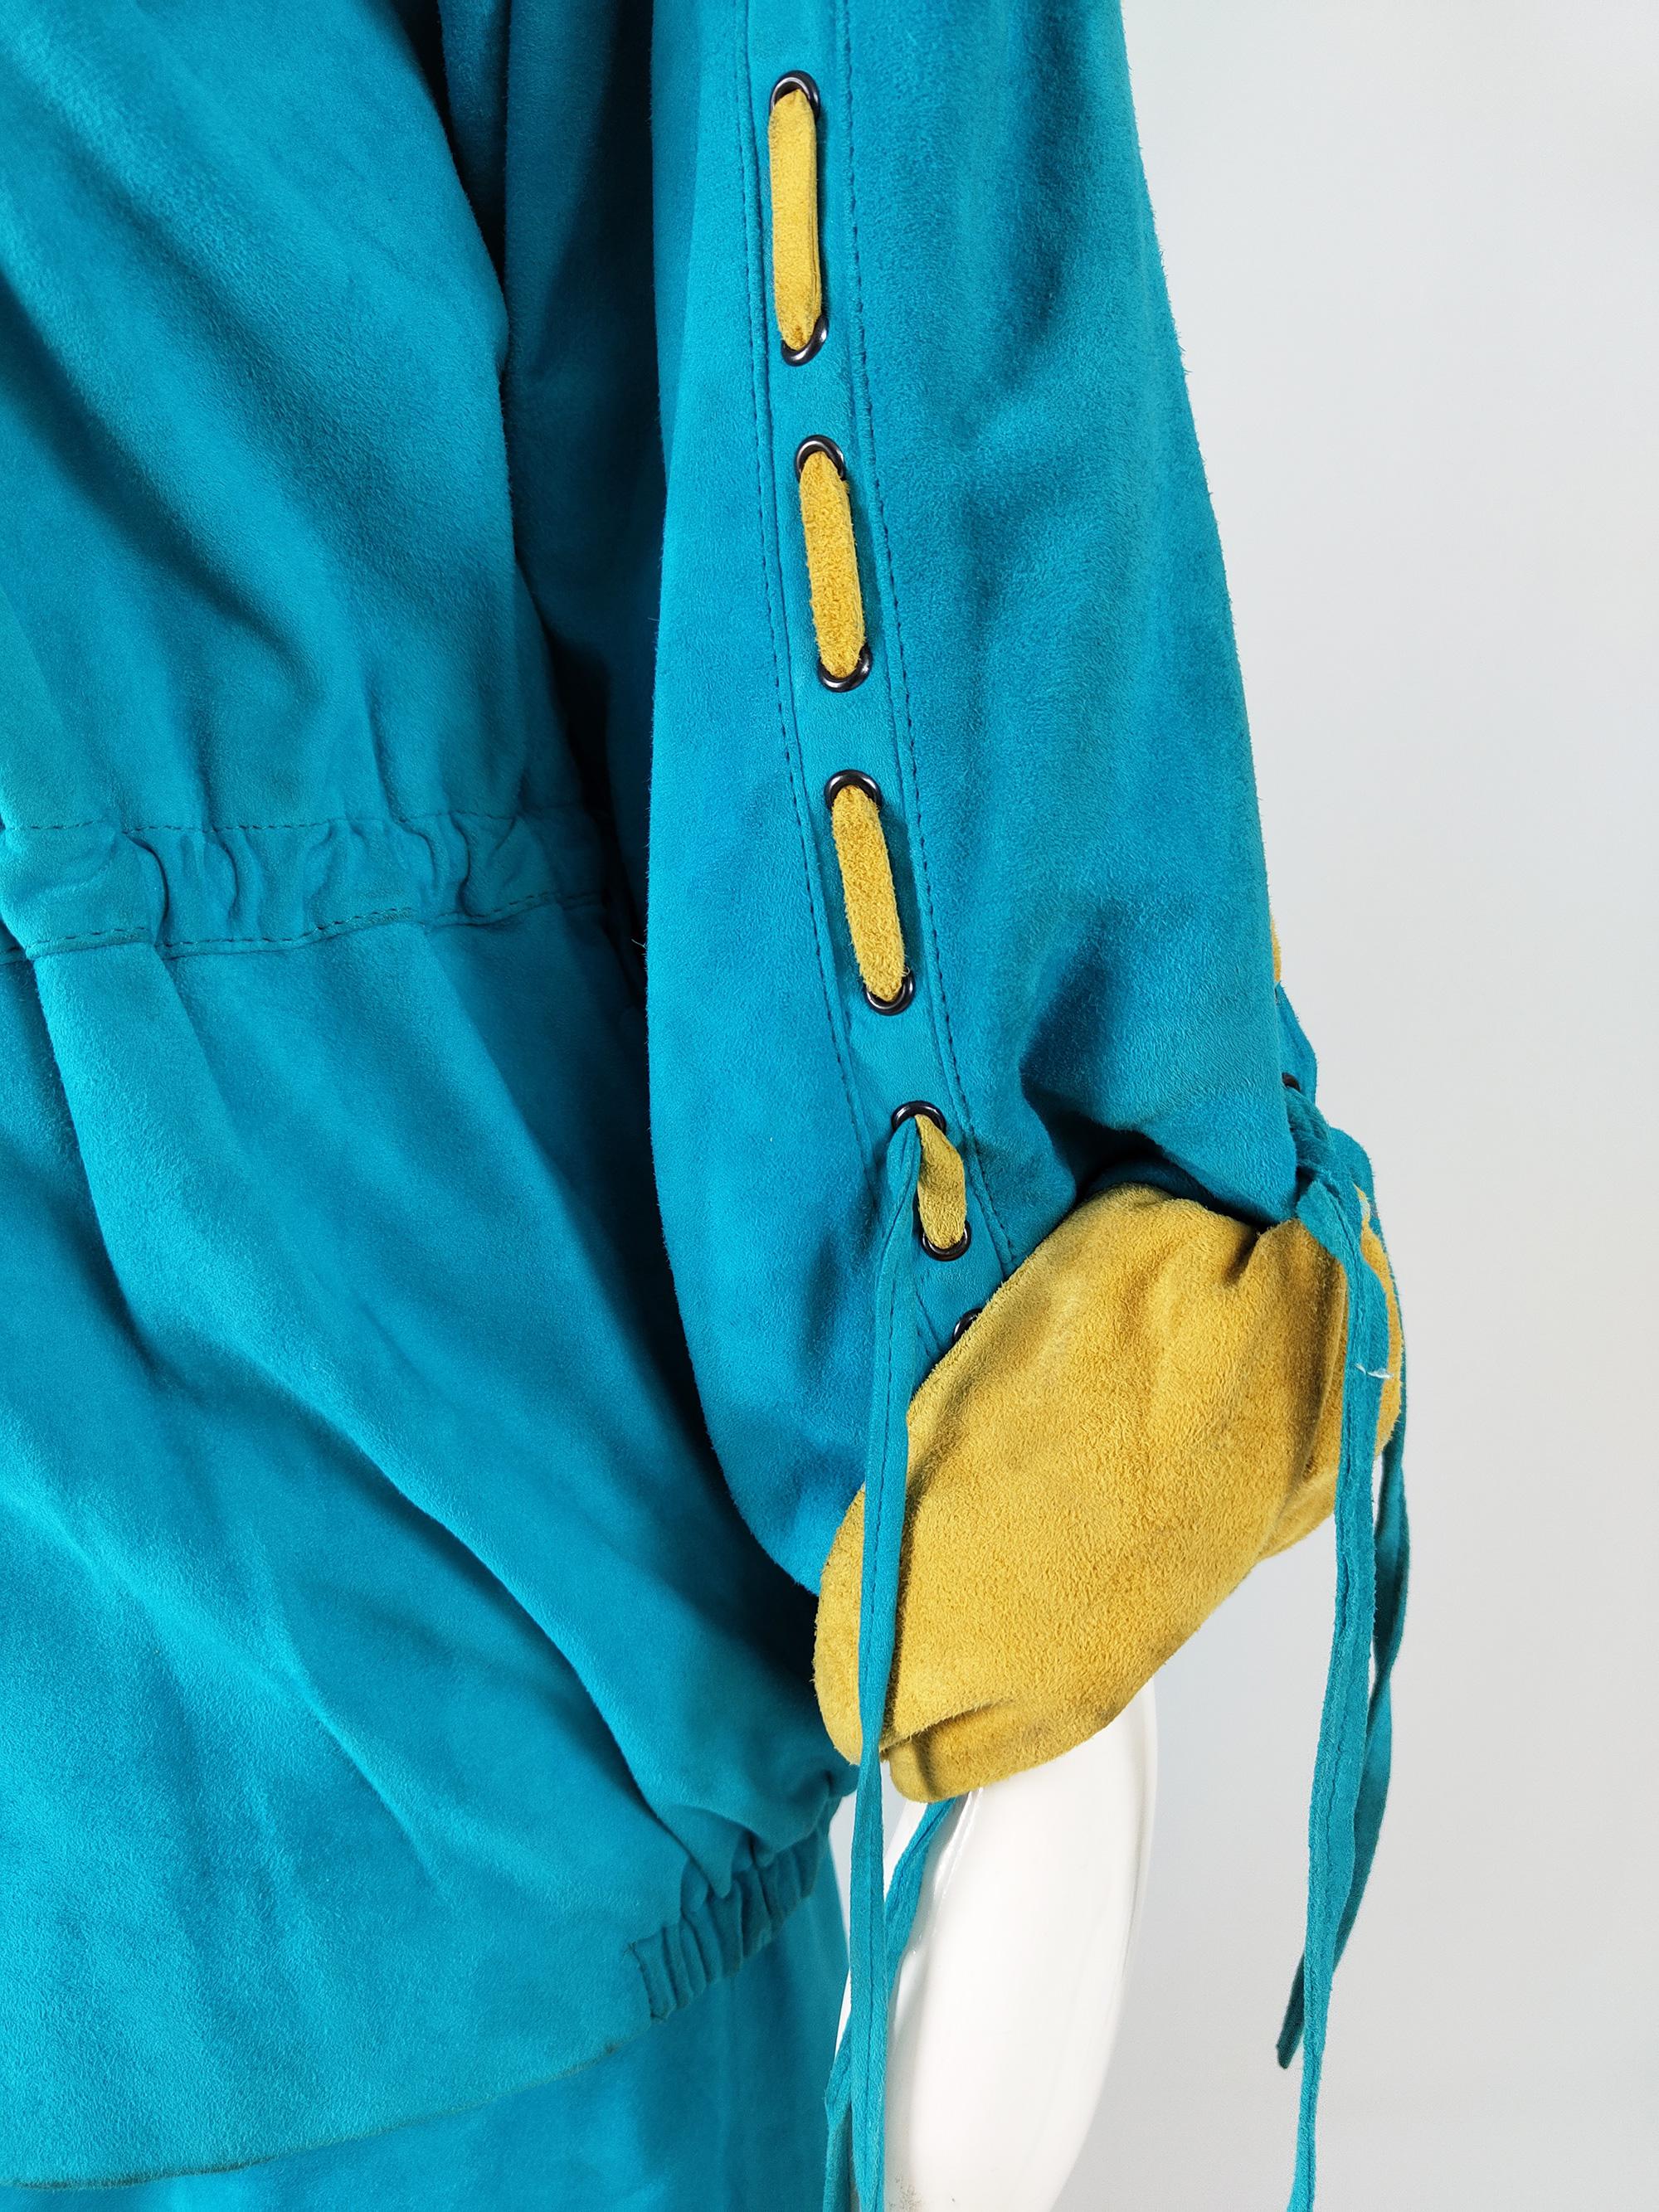 Enrico Coveri Vintage Turquoise & Mustard Real Suede Jacket & Skirt Suit, 1980s In Good Condition In Doncaster, South Yorkshire